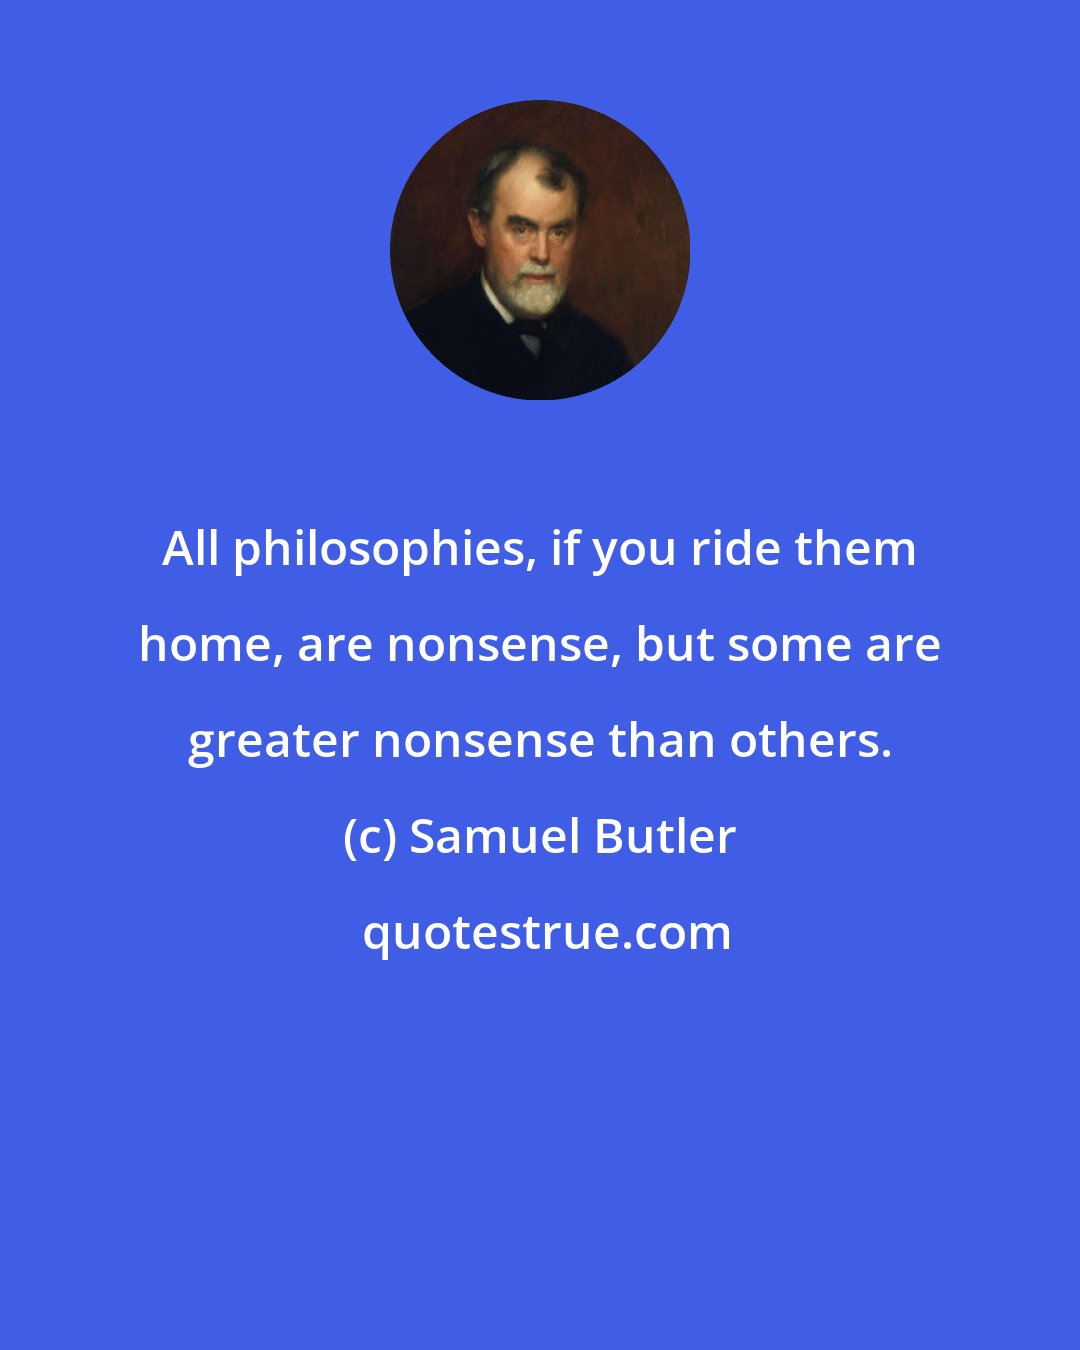 Samuel Butler: All philosophies, if you ride them home, are nonsense, but some are greater nonsense than others.